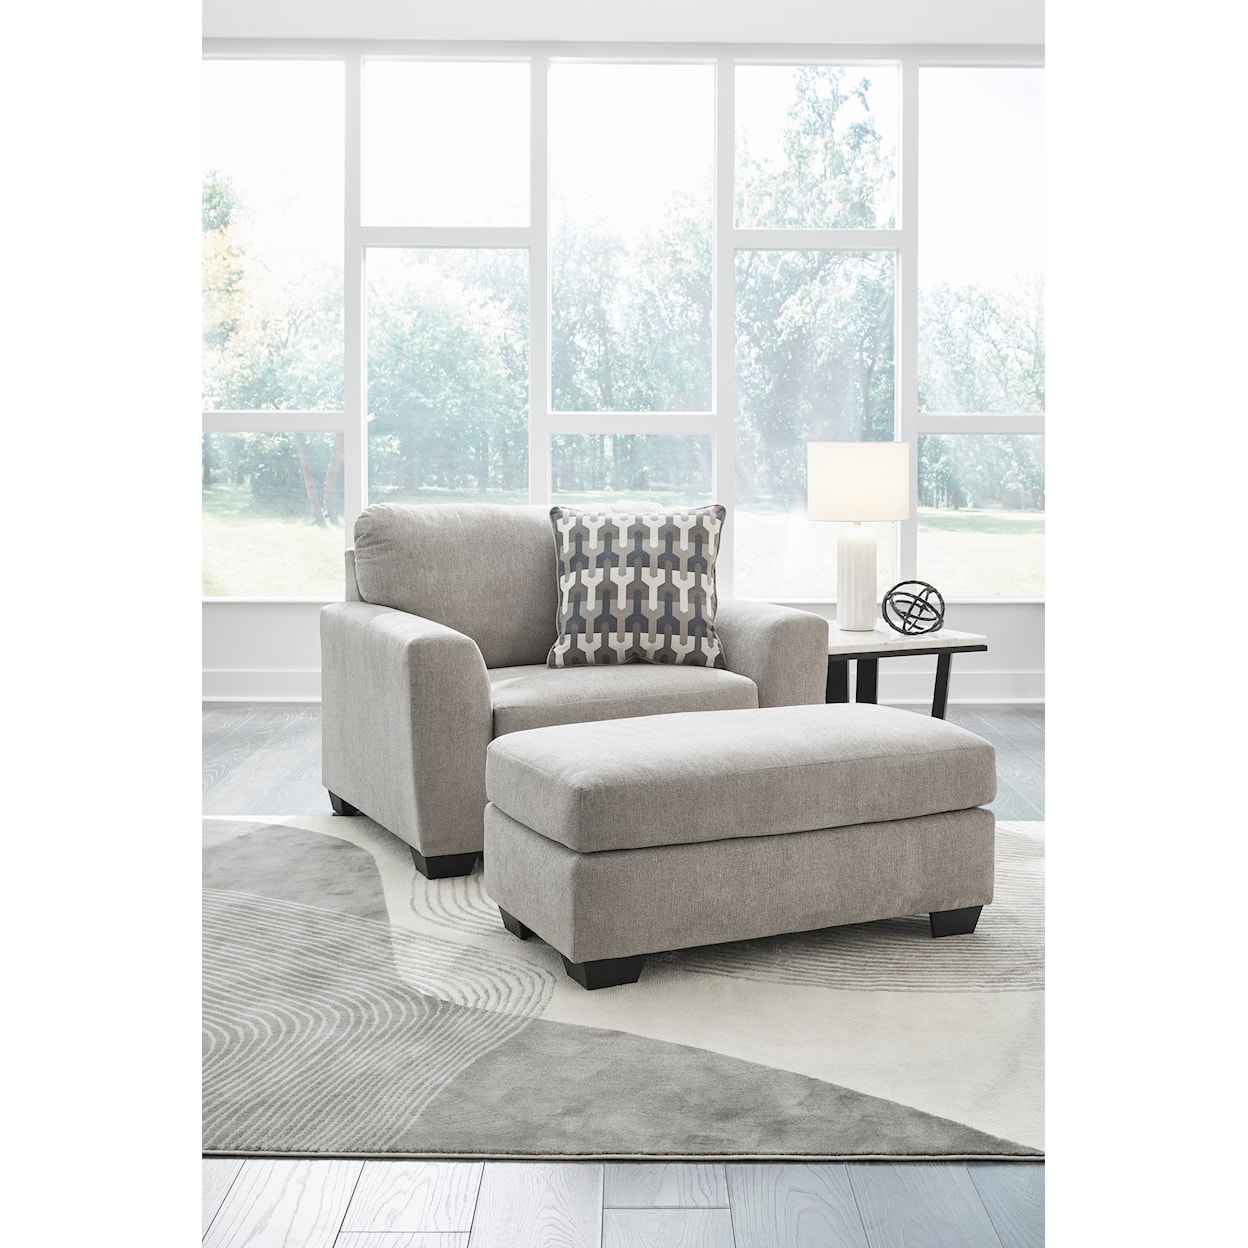 Ashley Furniture Signature Design Avenal Park Oversized Chair and Ottoman